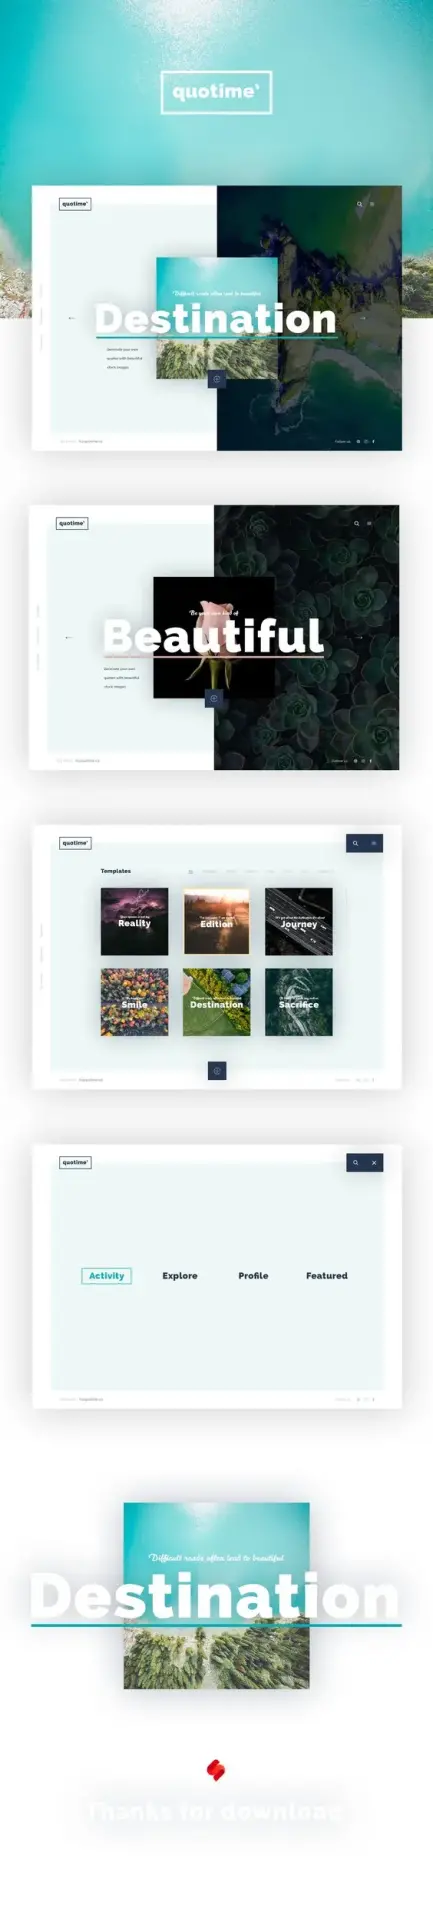 Quotime free psd template